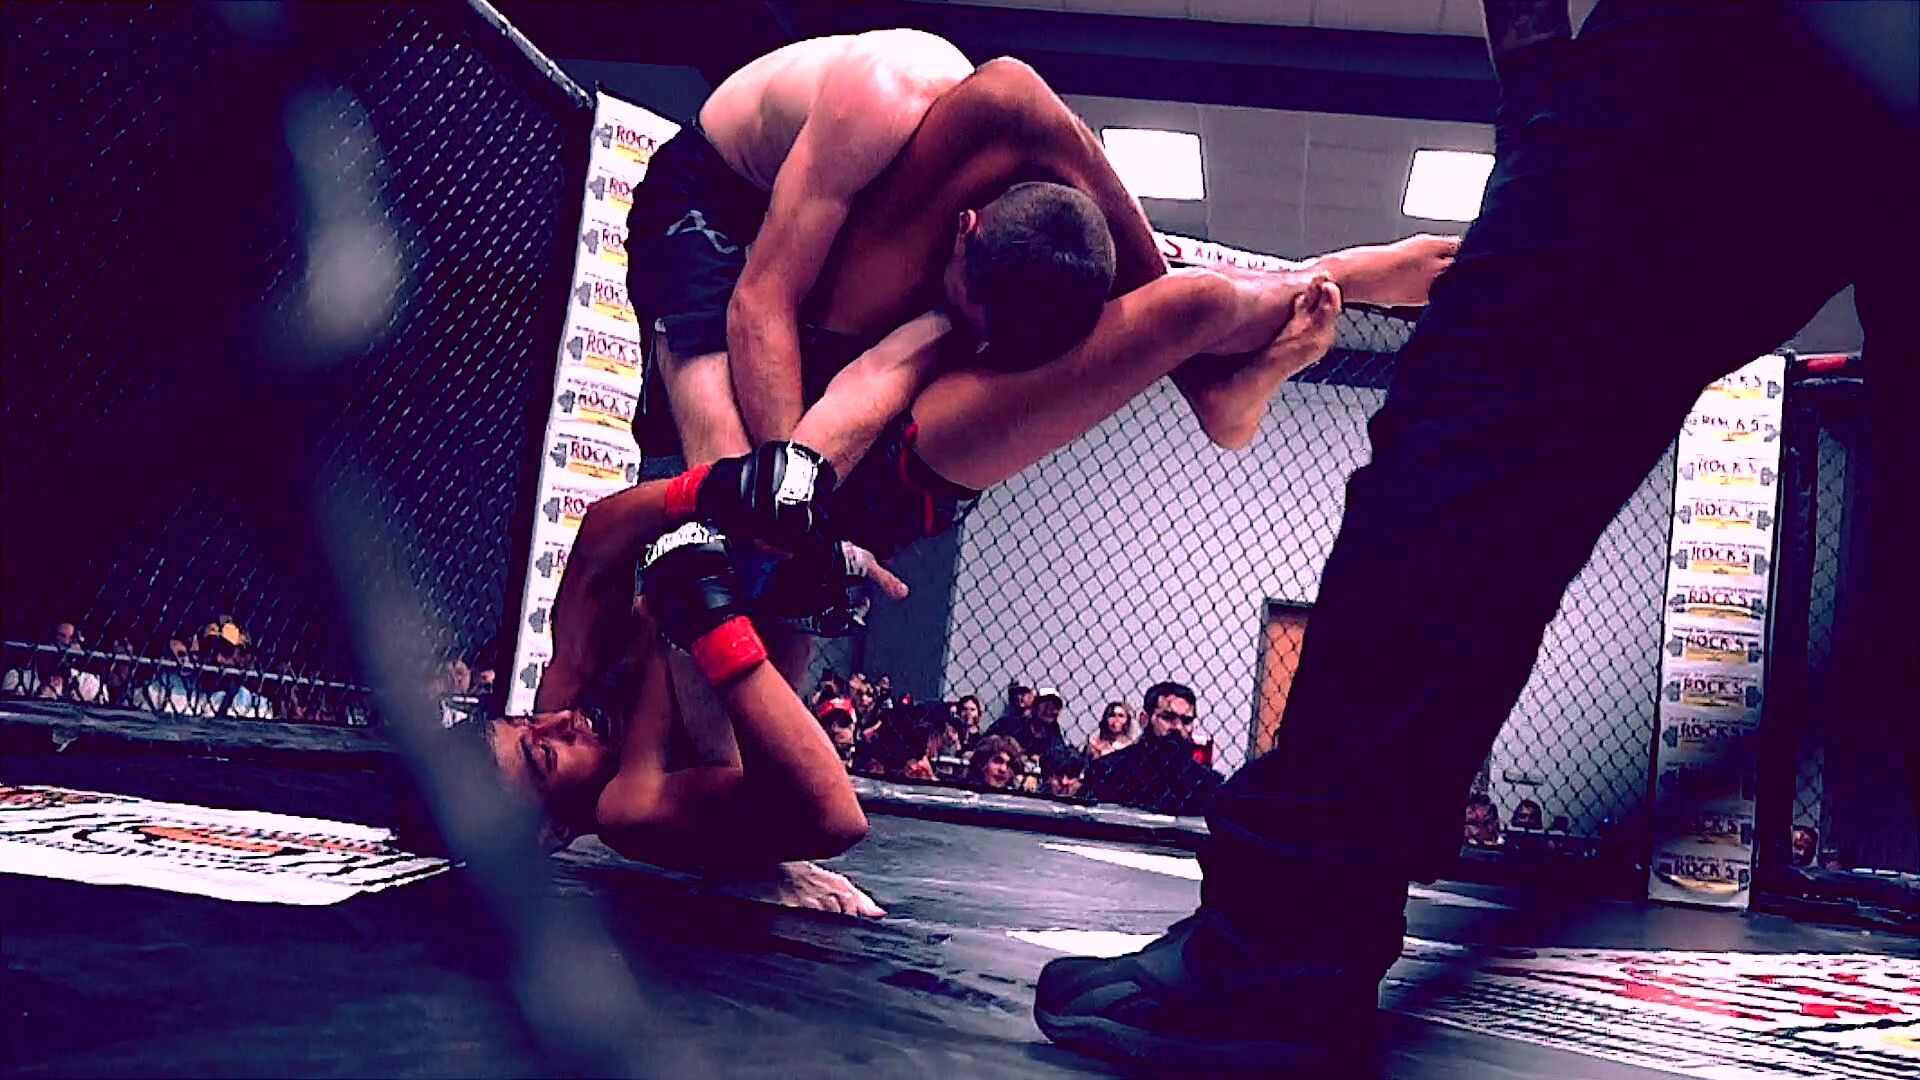 MMA comes to Victoria with knockout event | For Subscribers Only